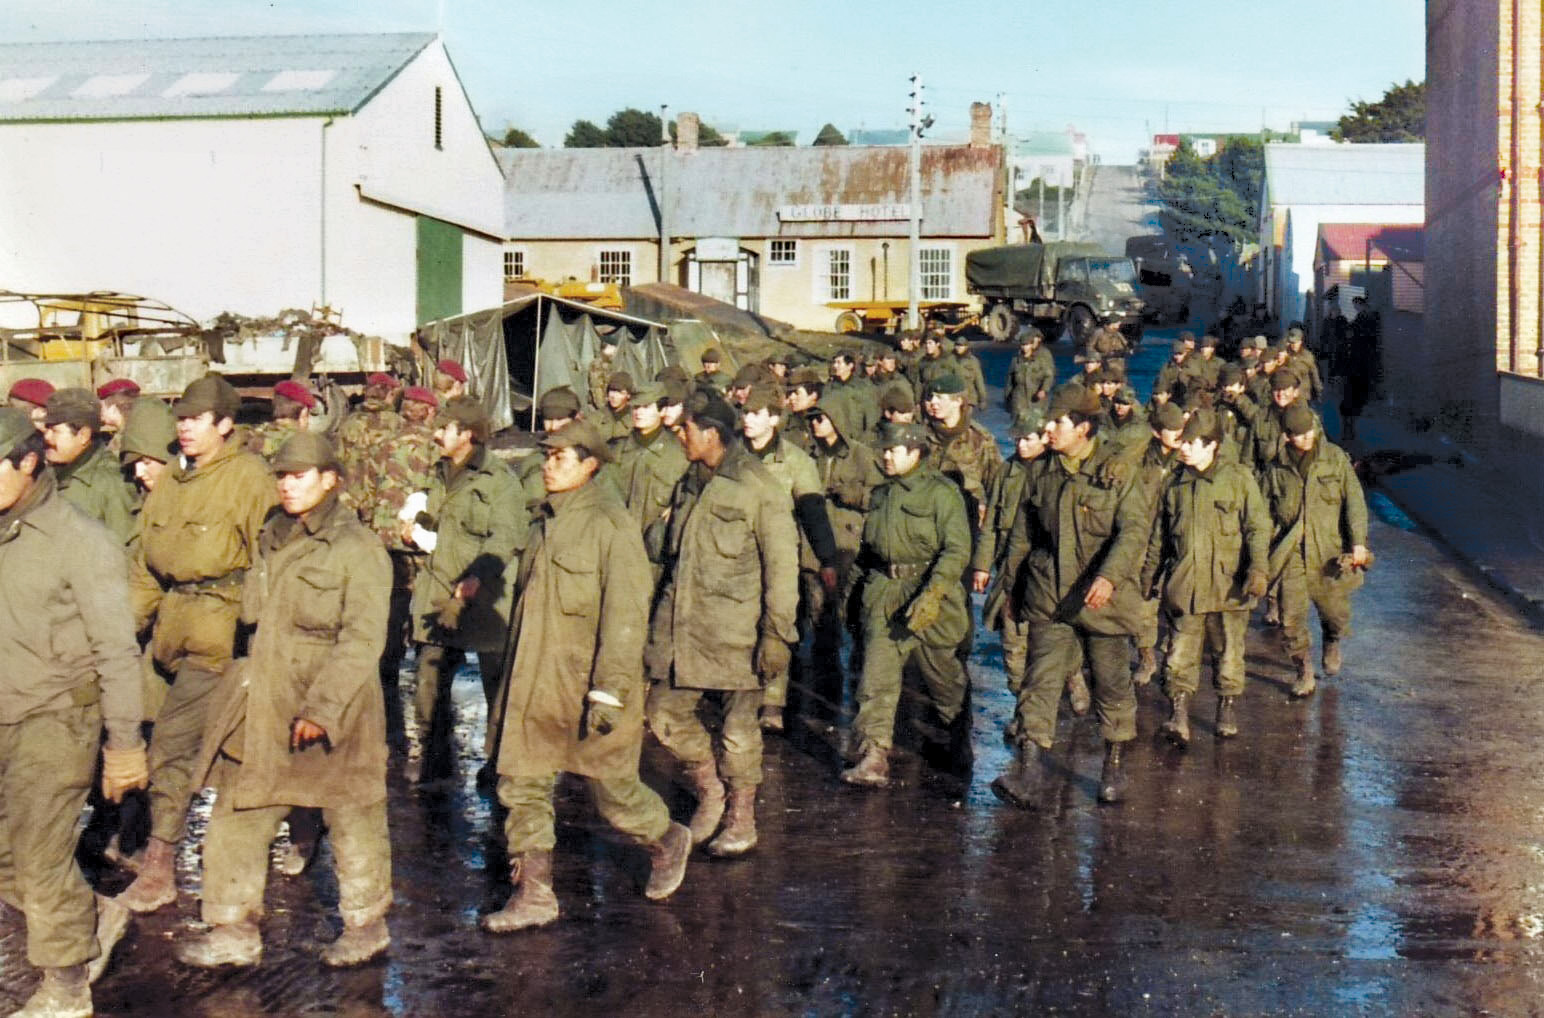 British soldiers lead Argentine prisoners through the streets of Port Stanley following the Argentine surrender on June 14, 1982. For the Argentines, who had miscalculated British resolve, the war was a shameful defeat.